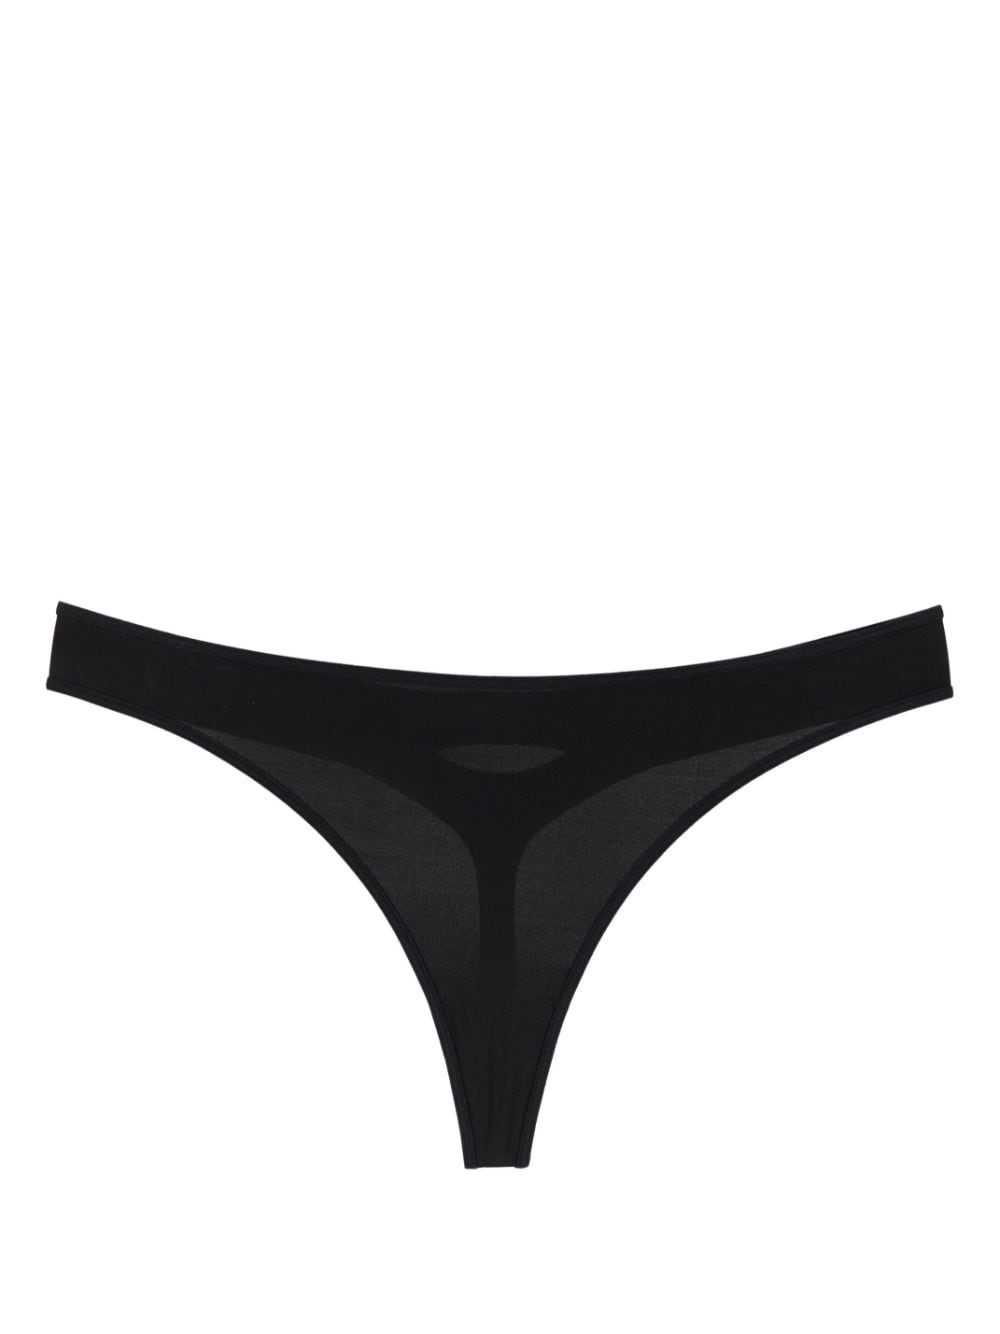 Velocity cut-out thong